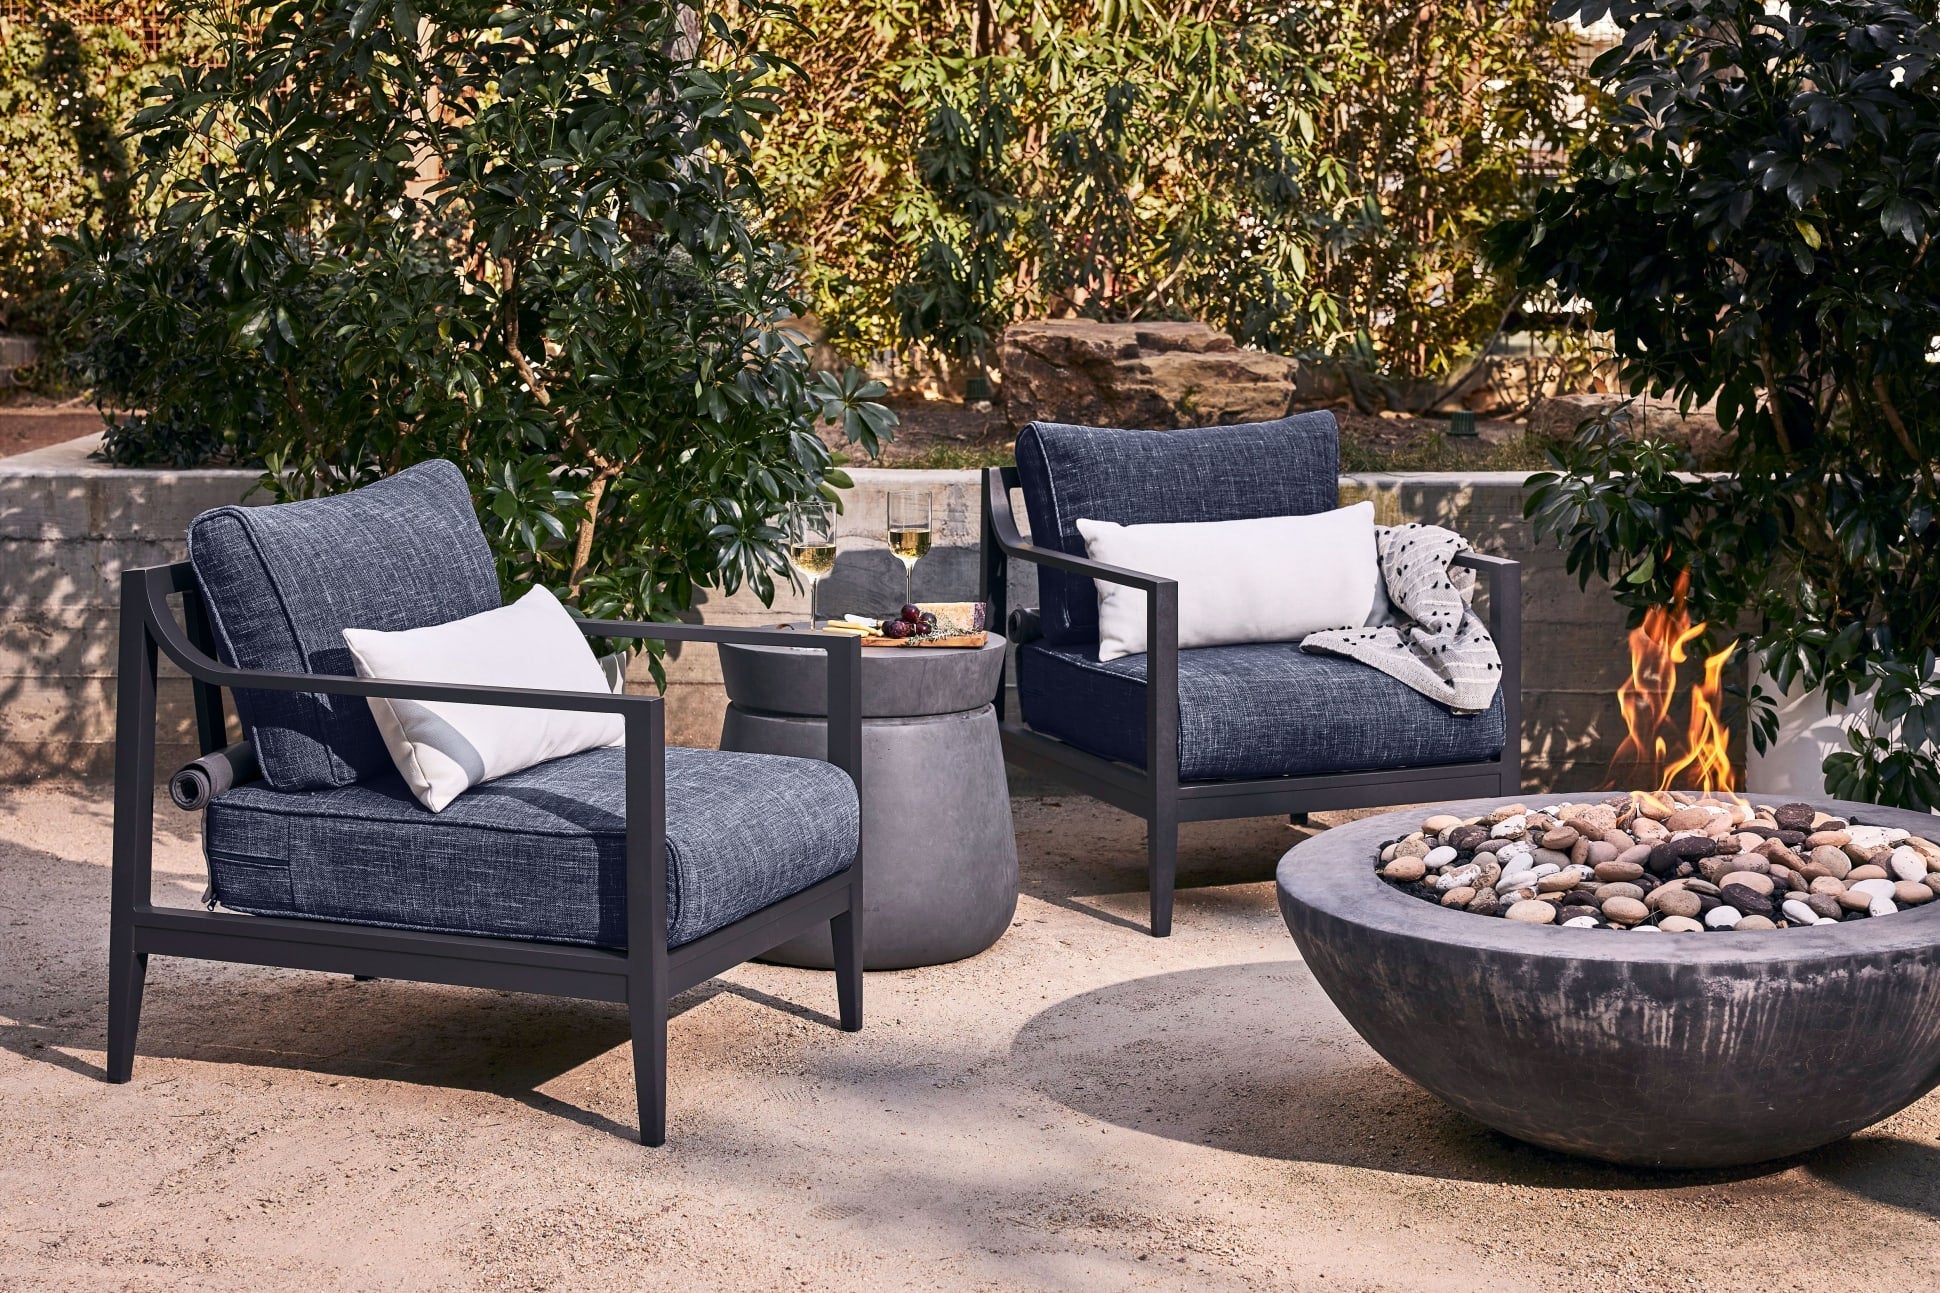 Live Outer 127" Charcoal Aluminum Outdoor Sofa With Armchairs and Deep Sea Navy Cushion (6-Seat)